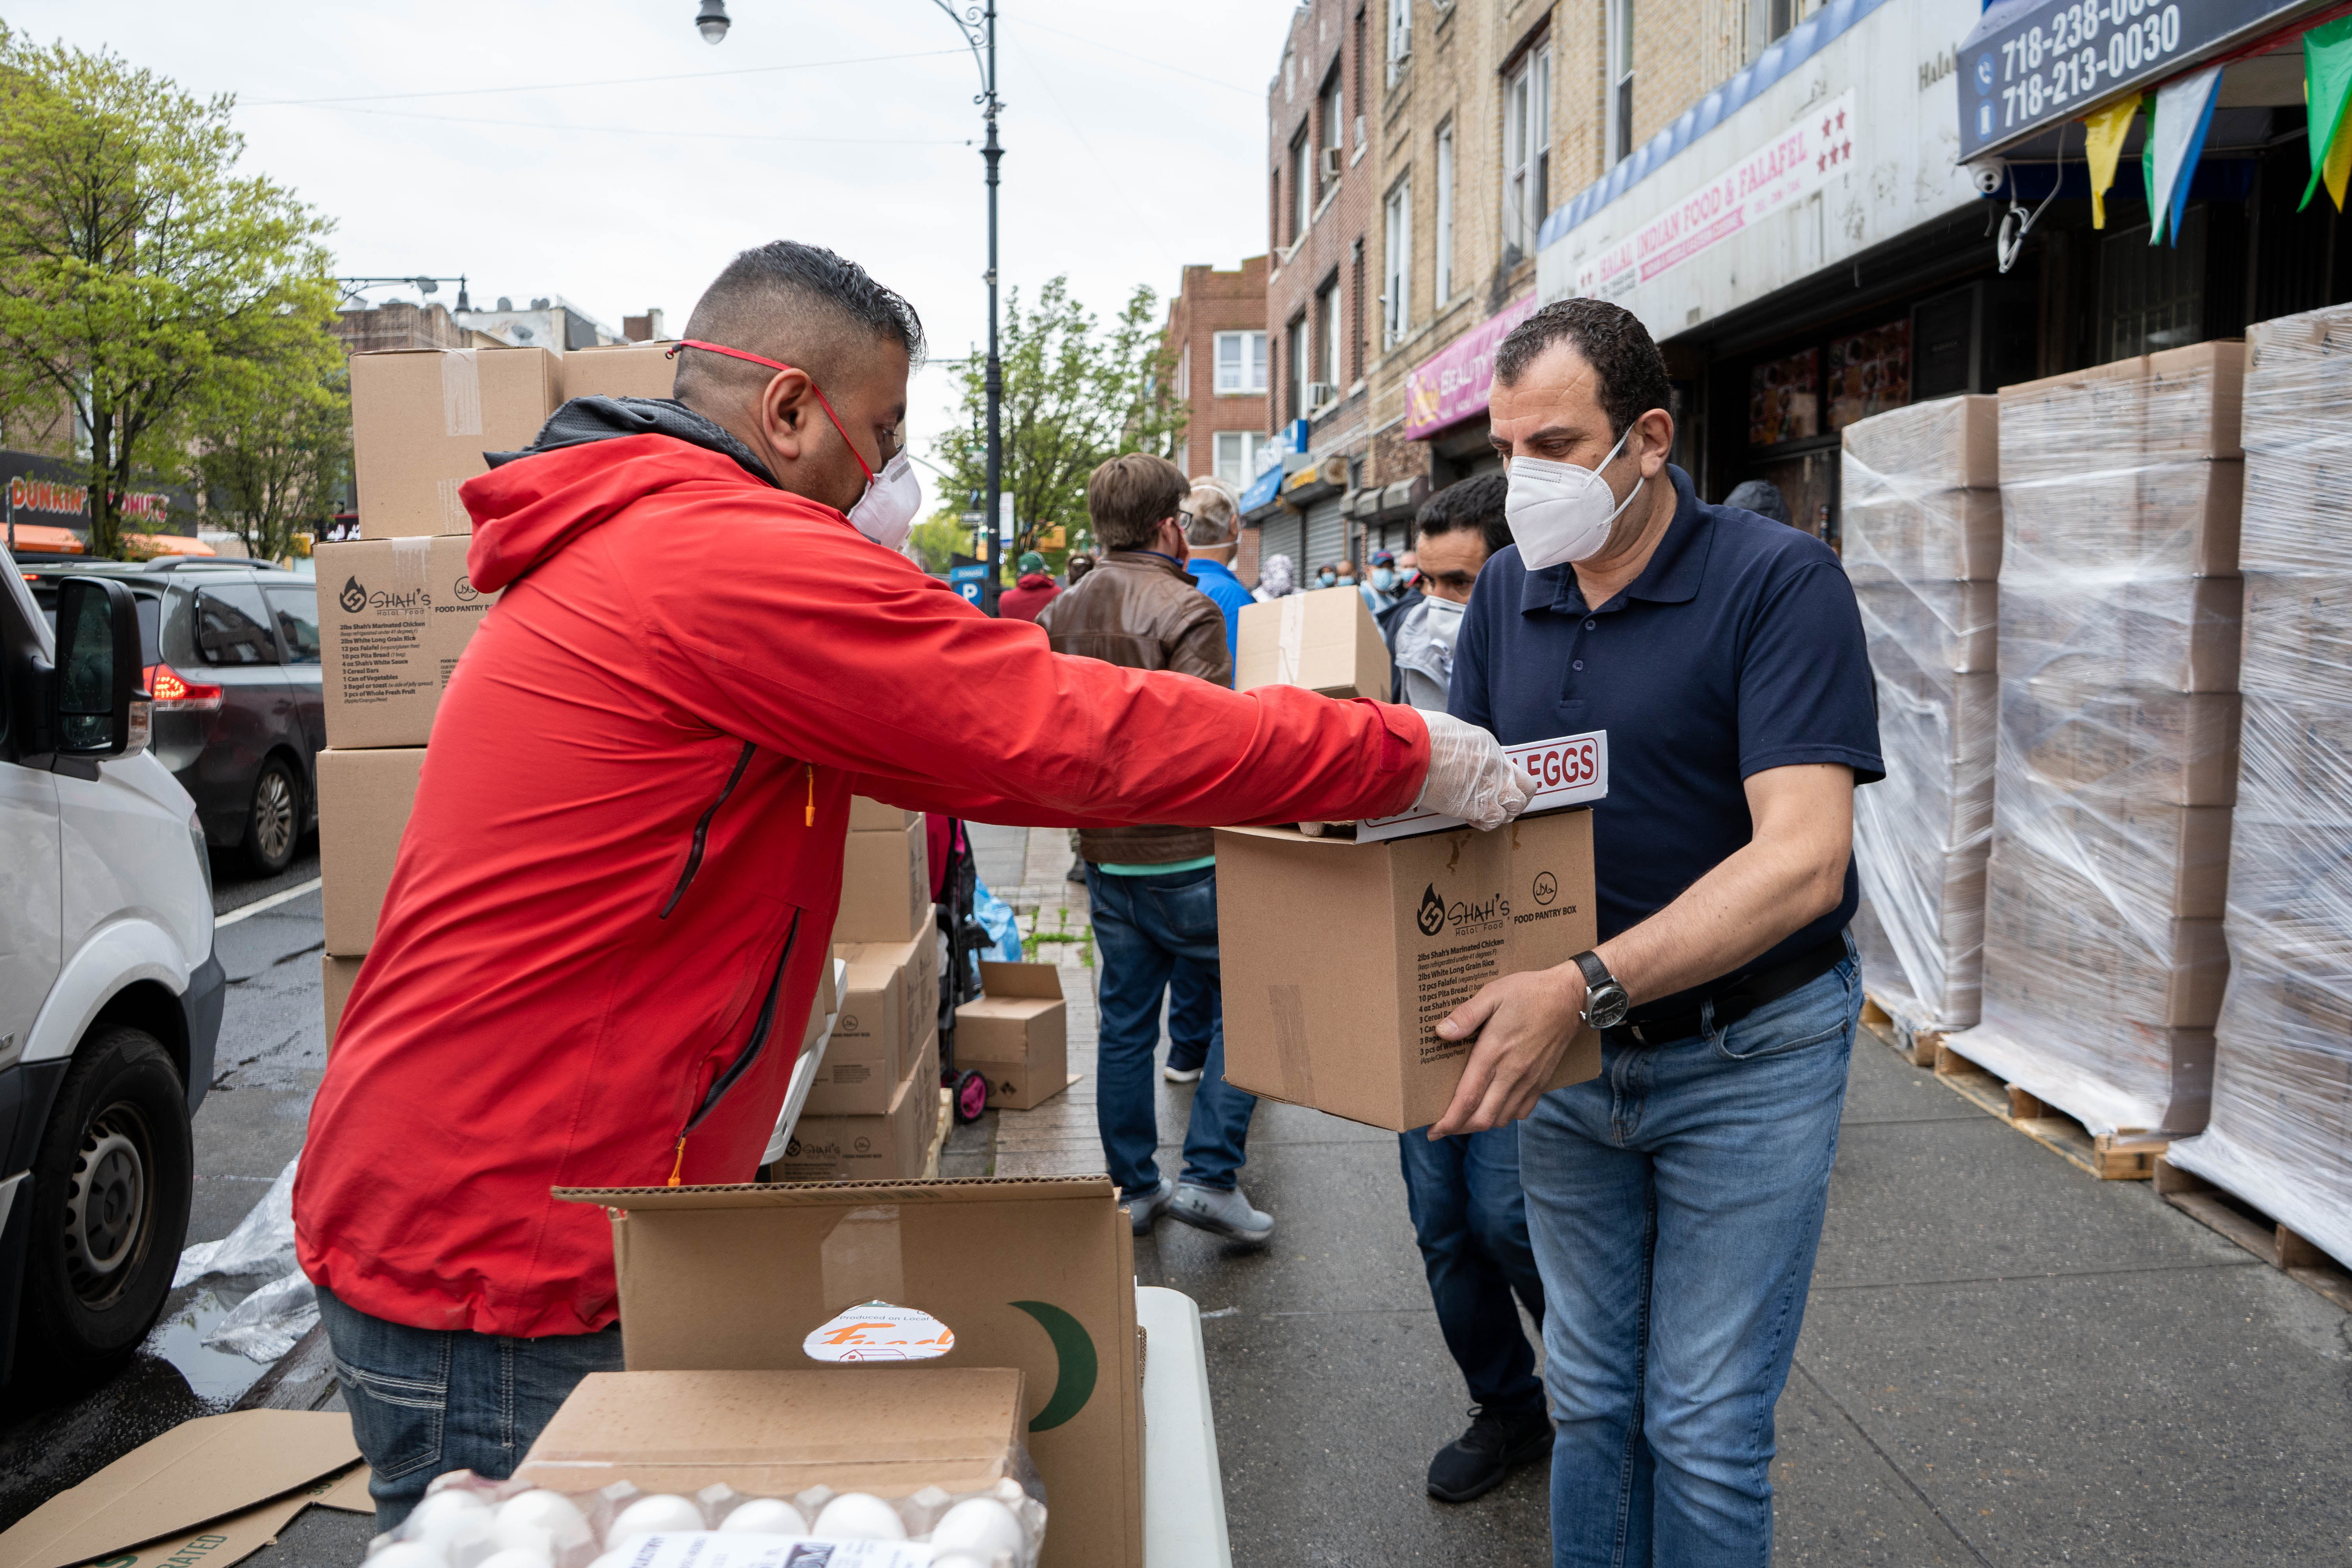 A man in a red jacket passes a box of food supplies to another man at a sidewalk food pantry